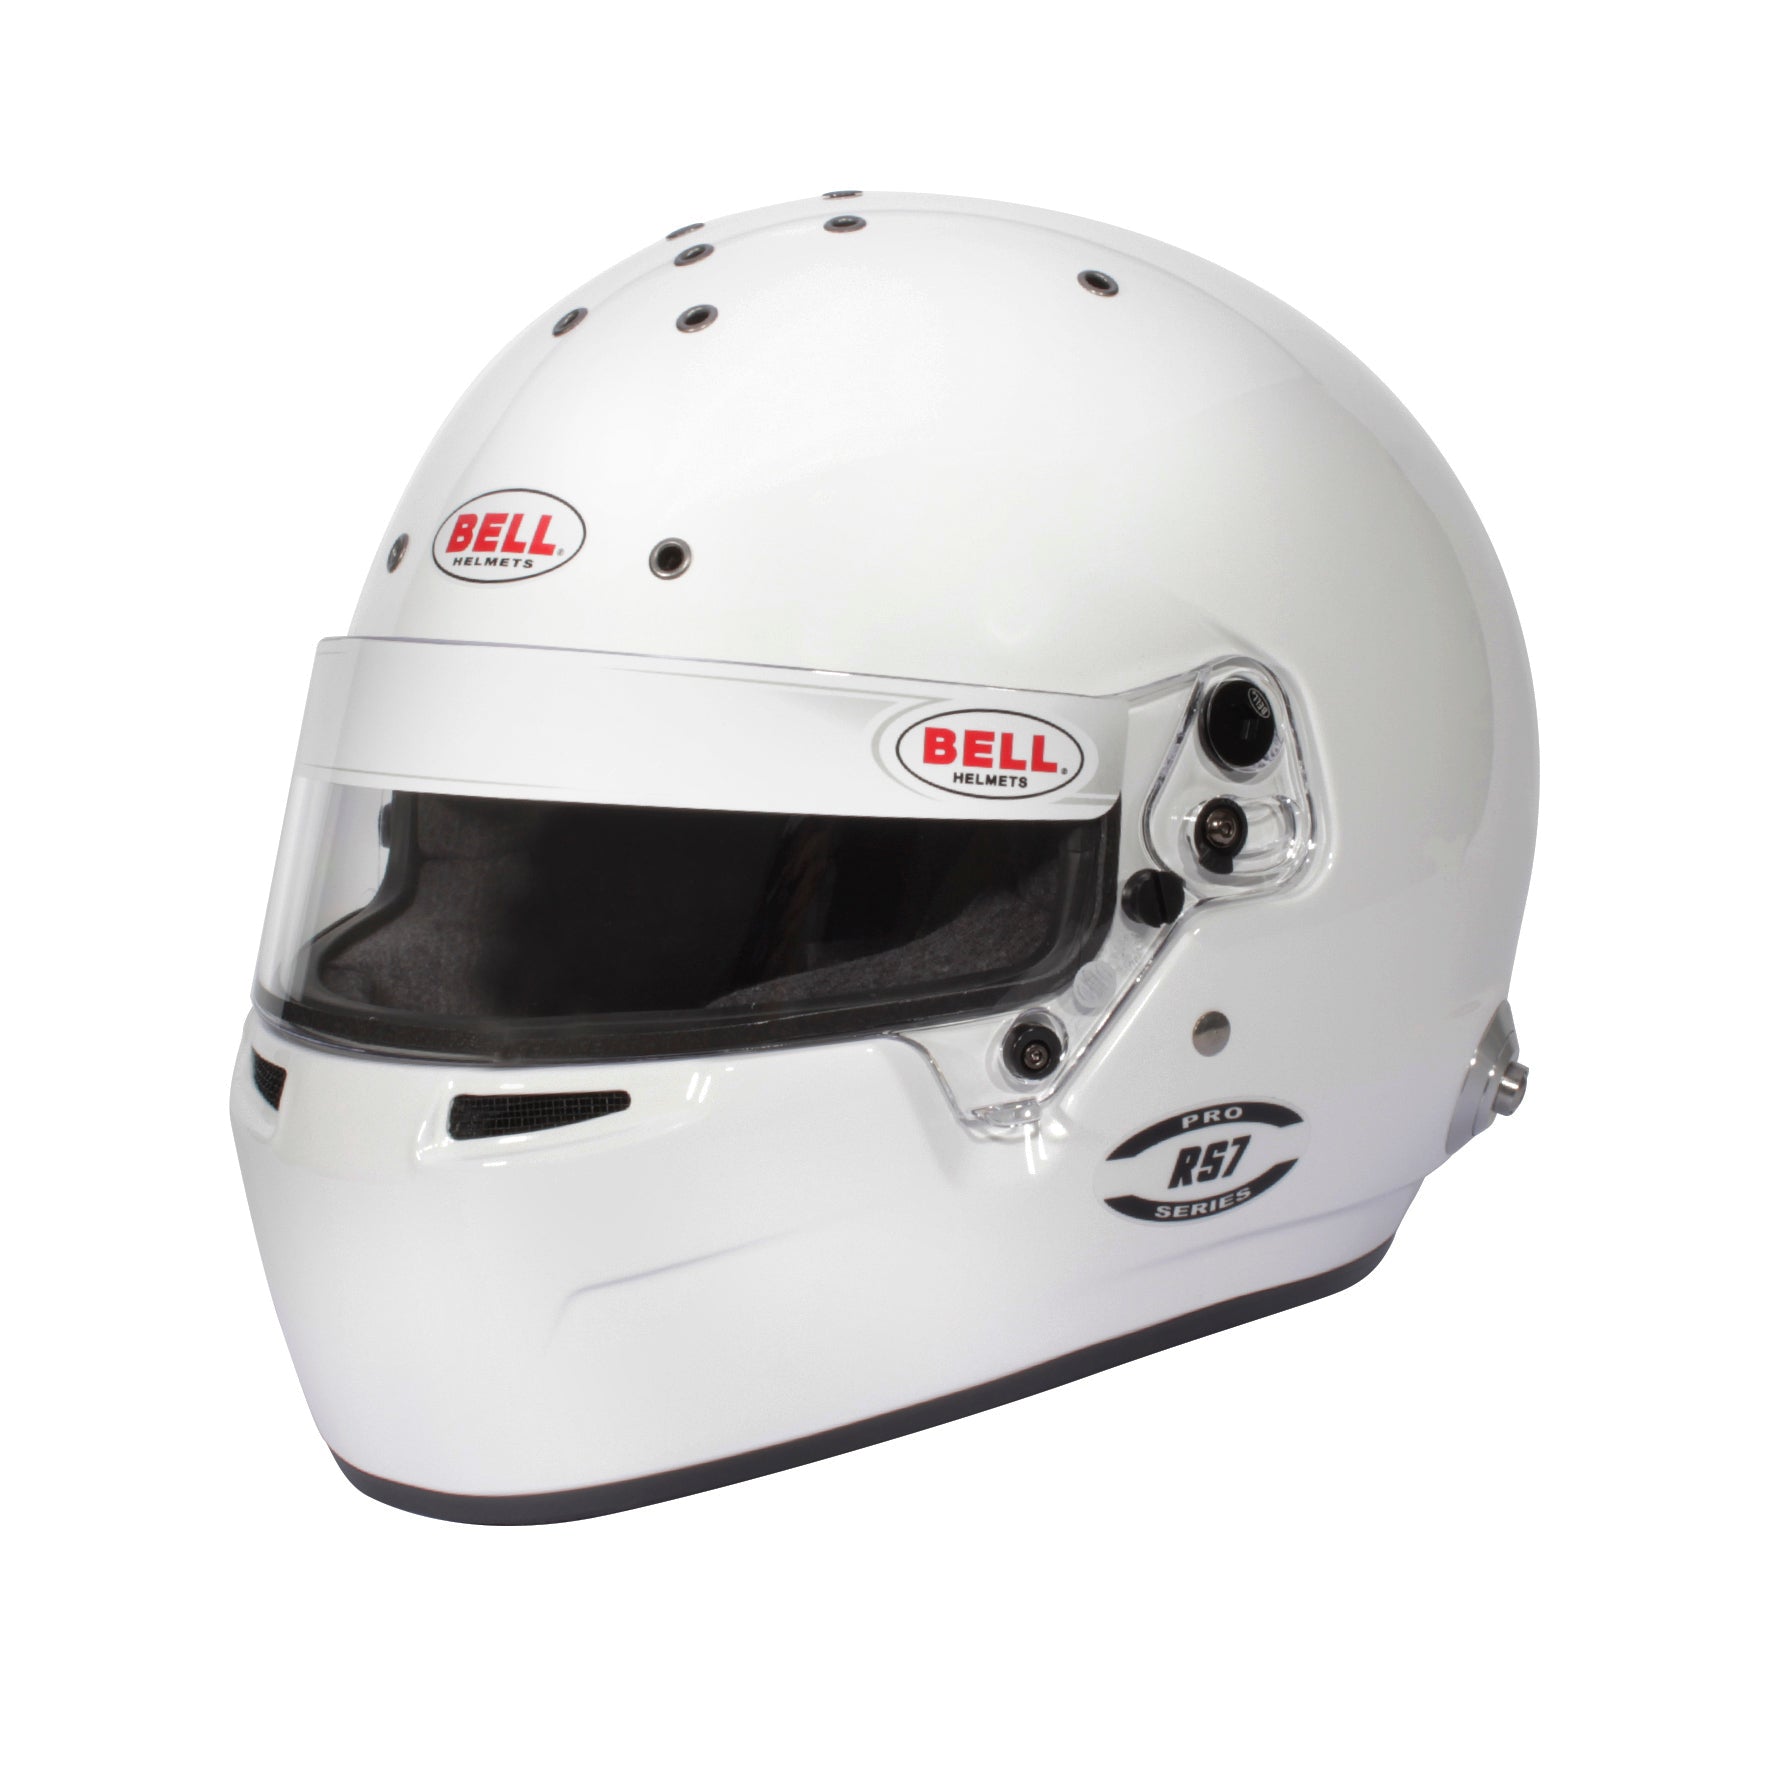 BELL 1310A10 Racing helmet full face RS7, HANS, FIA8859/SA2020, size 60 (7 1/2) Photo-0 